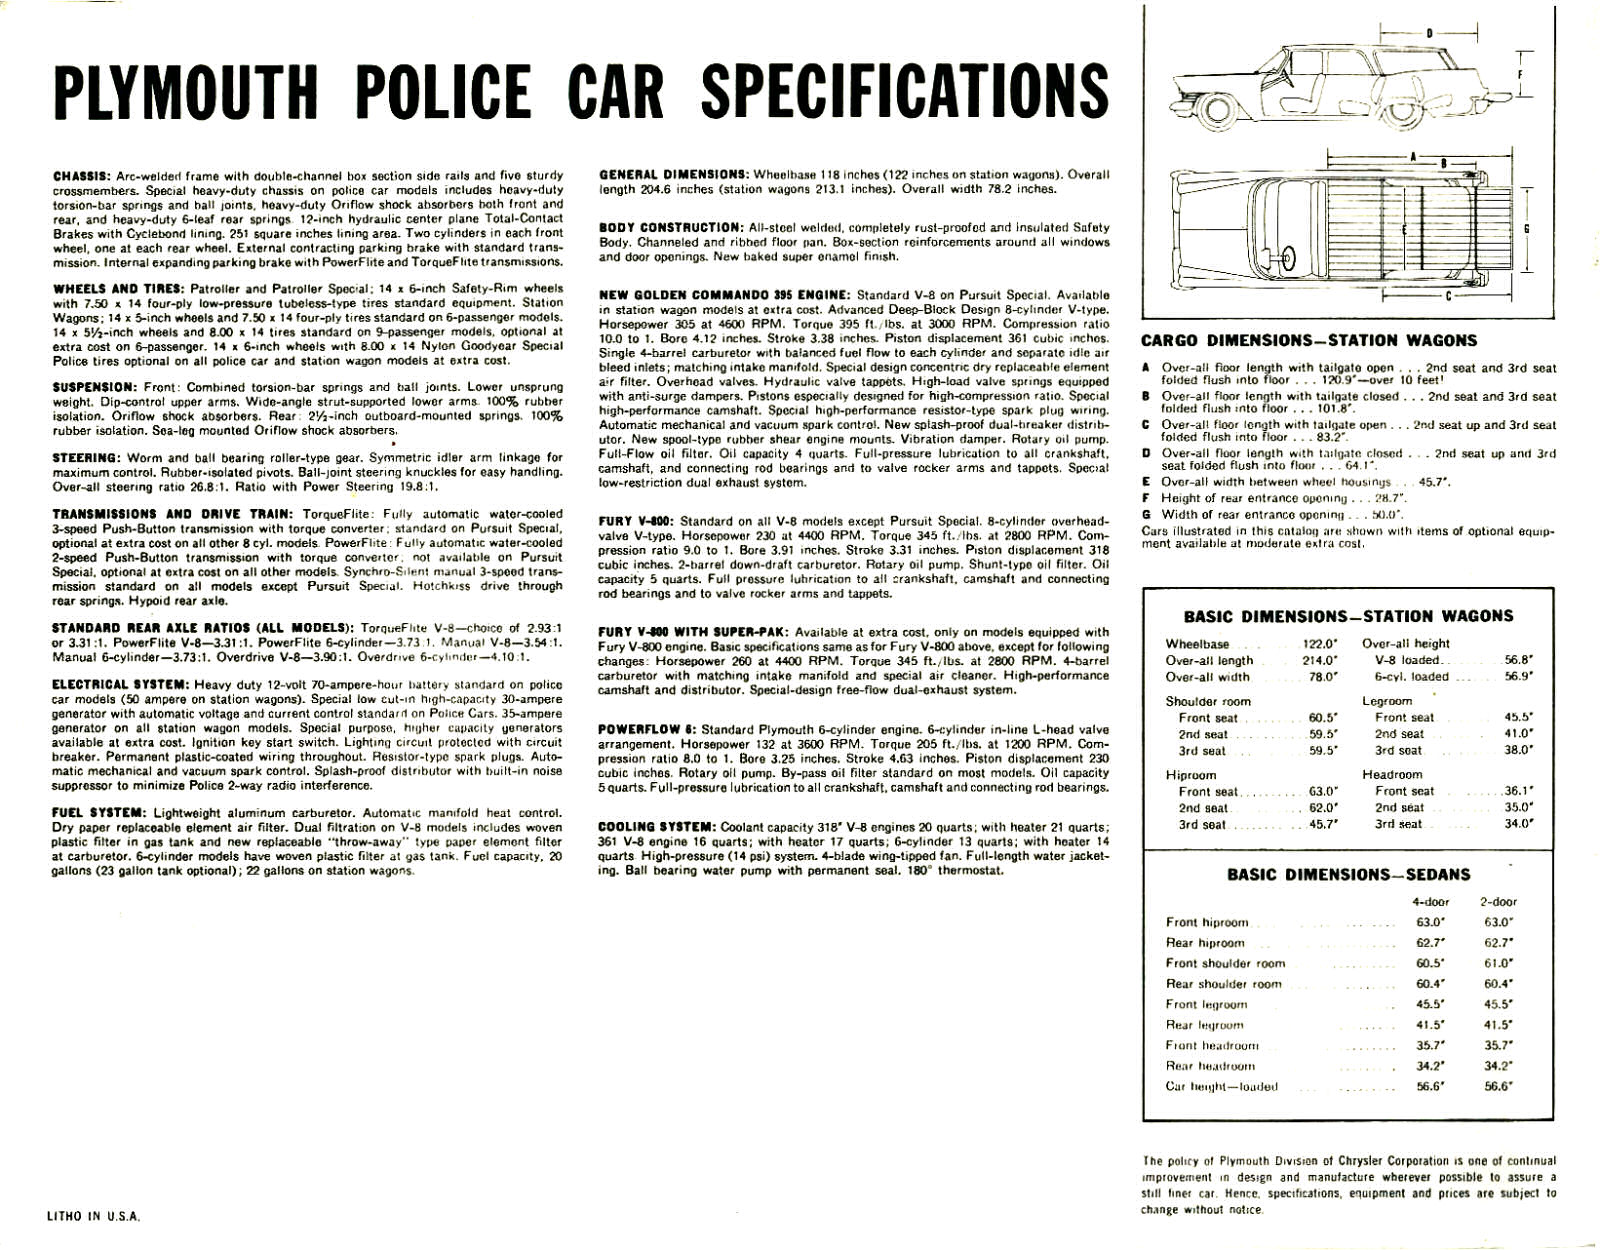 1959 Plymouth Police Specials.pdf-2023-11-22 14.29.7_Page_7